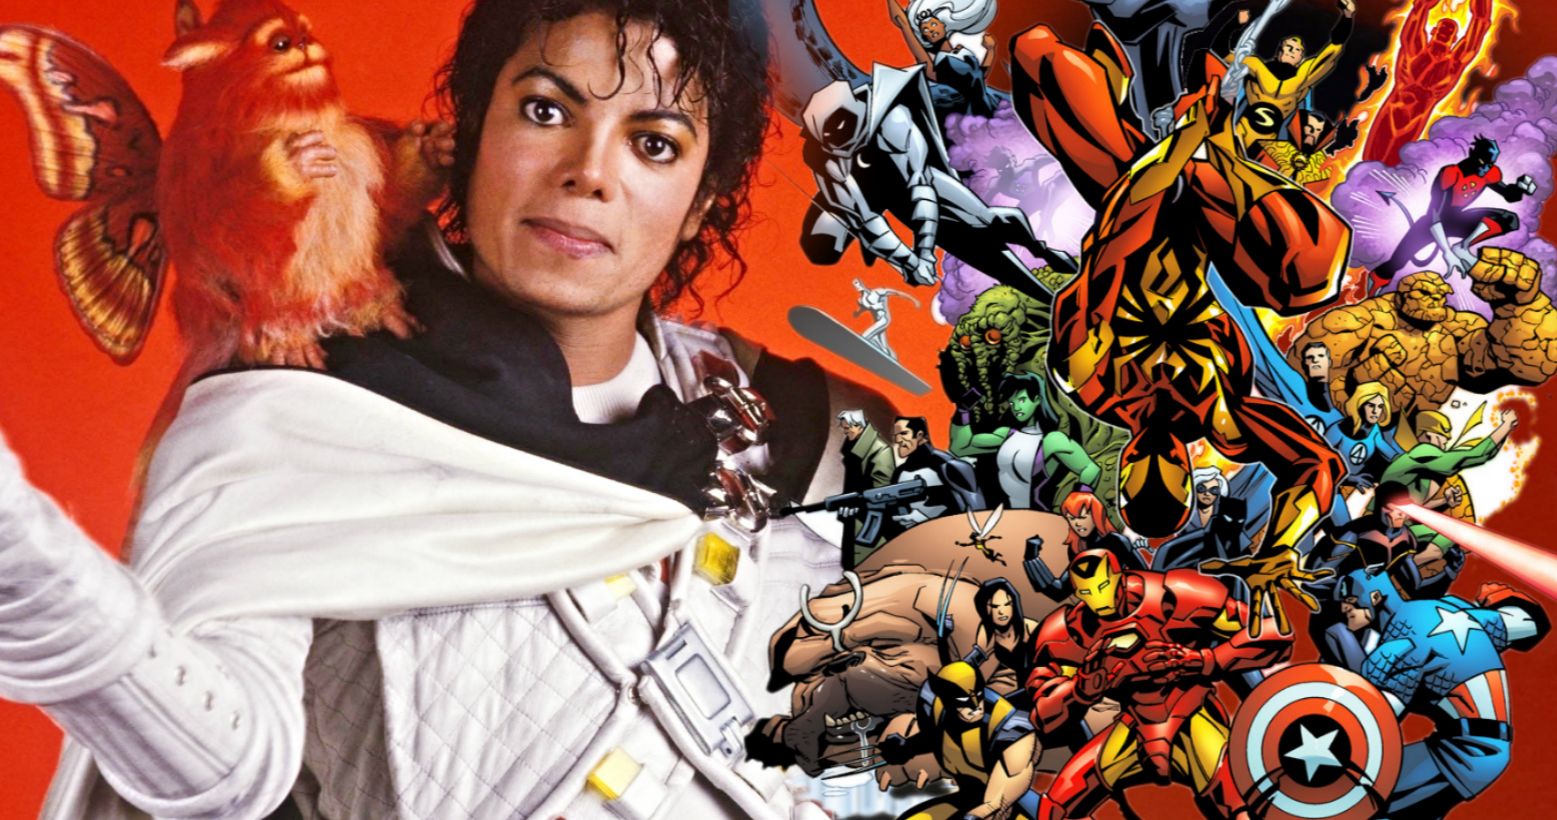 Michael Jackson Almost Bought Marvel in the '90s But Got Shut Down